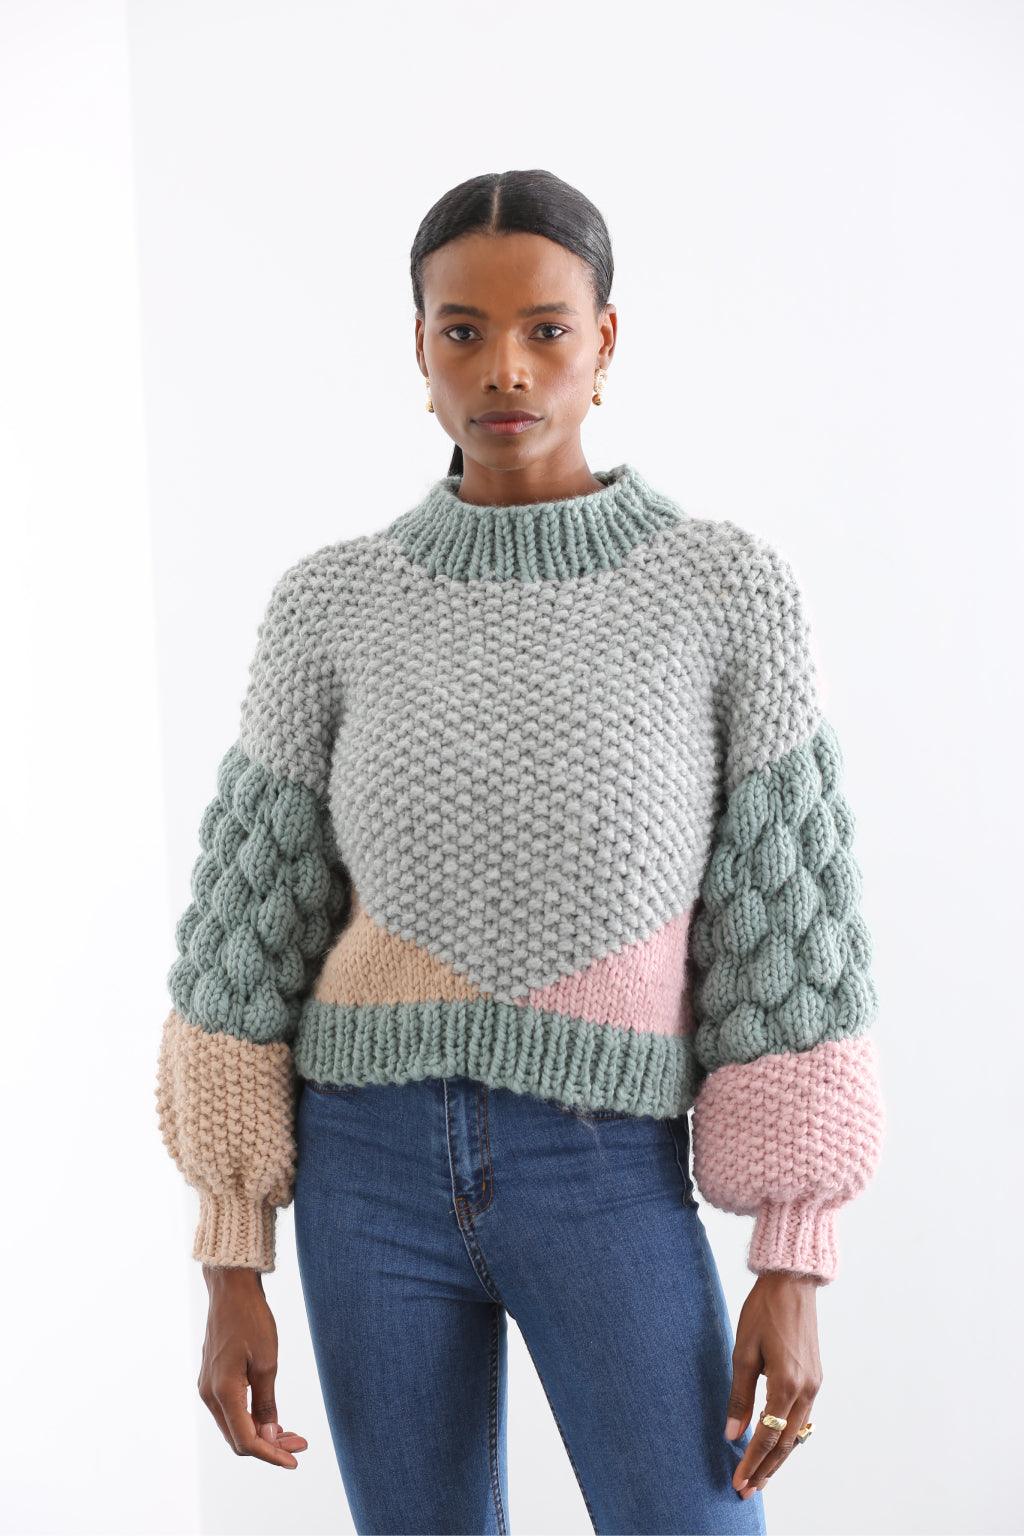 Hand knitted jumper